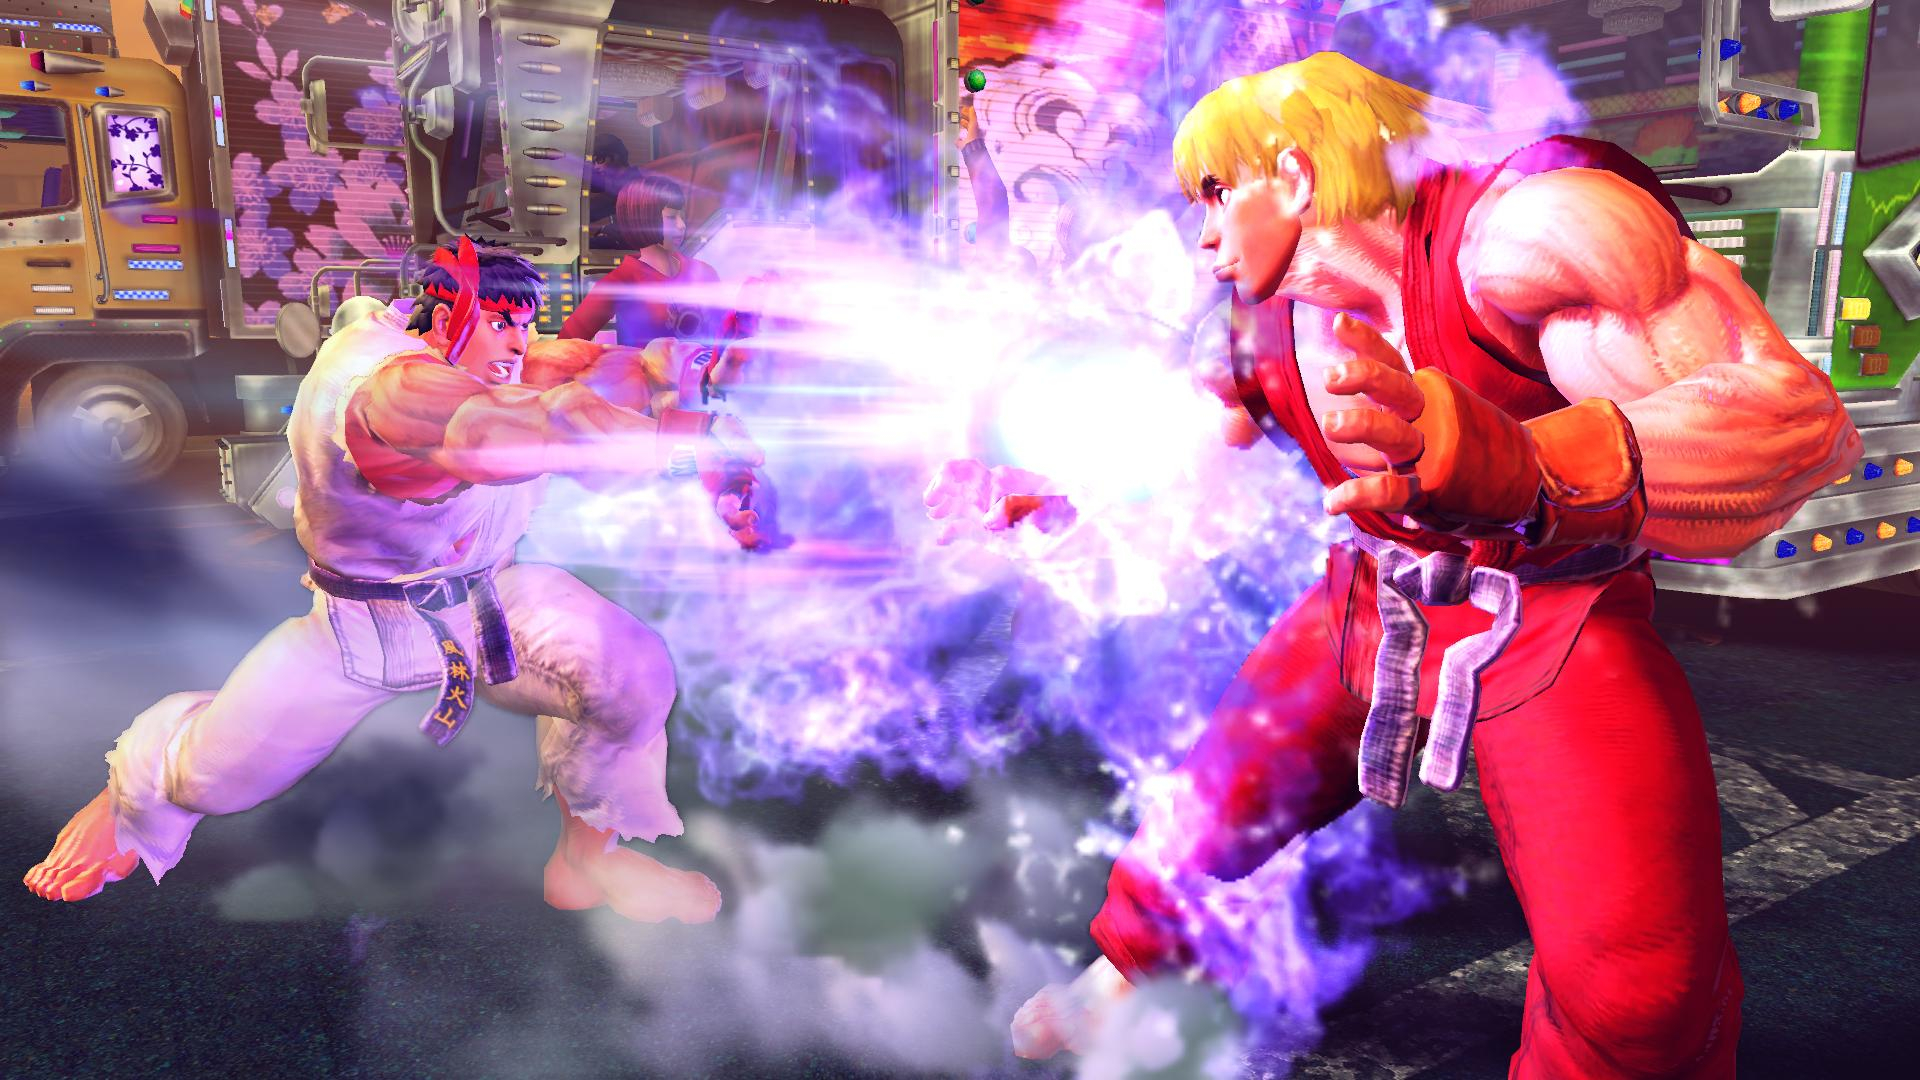 1920x1080 Ultra Street Fighter 4 TFG Review / Art Gallery